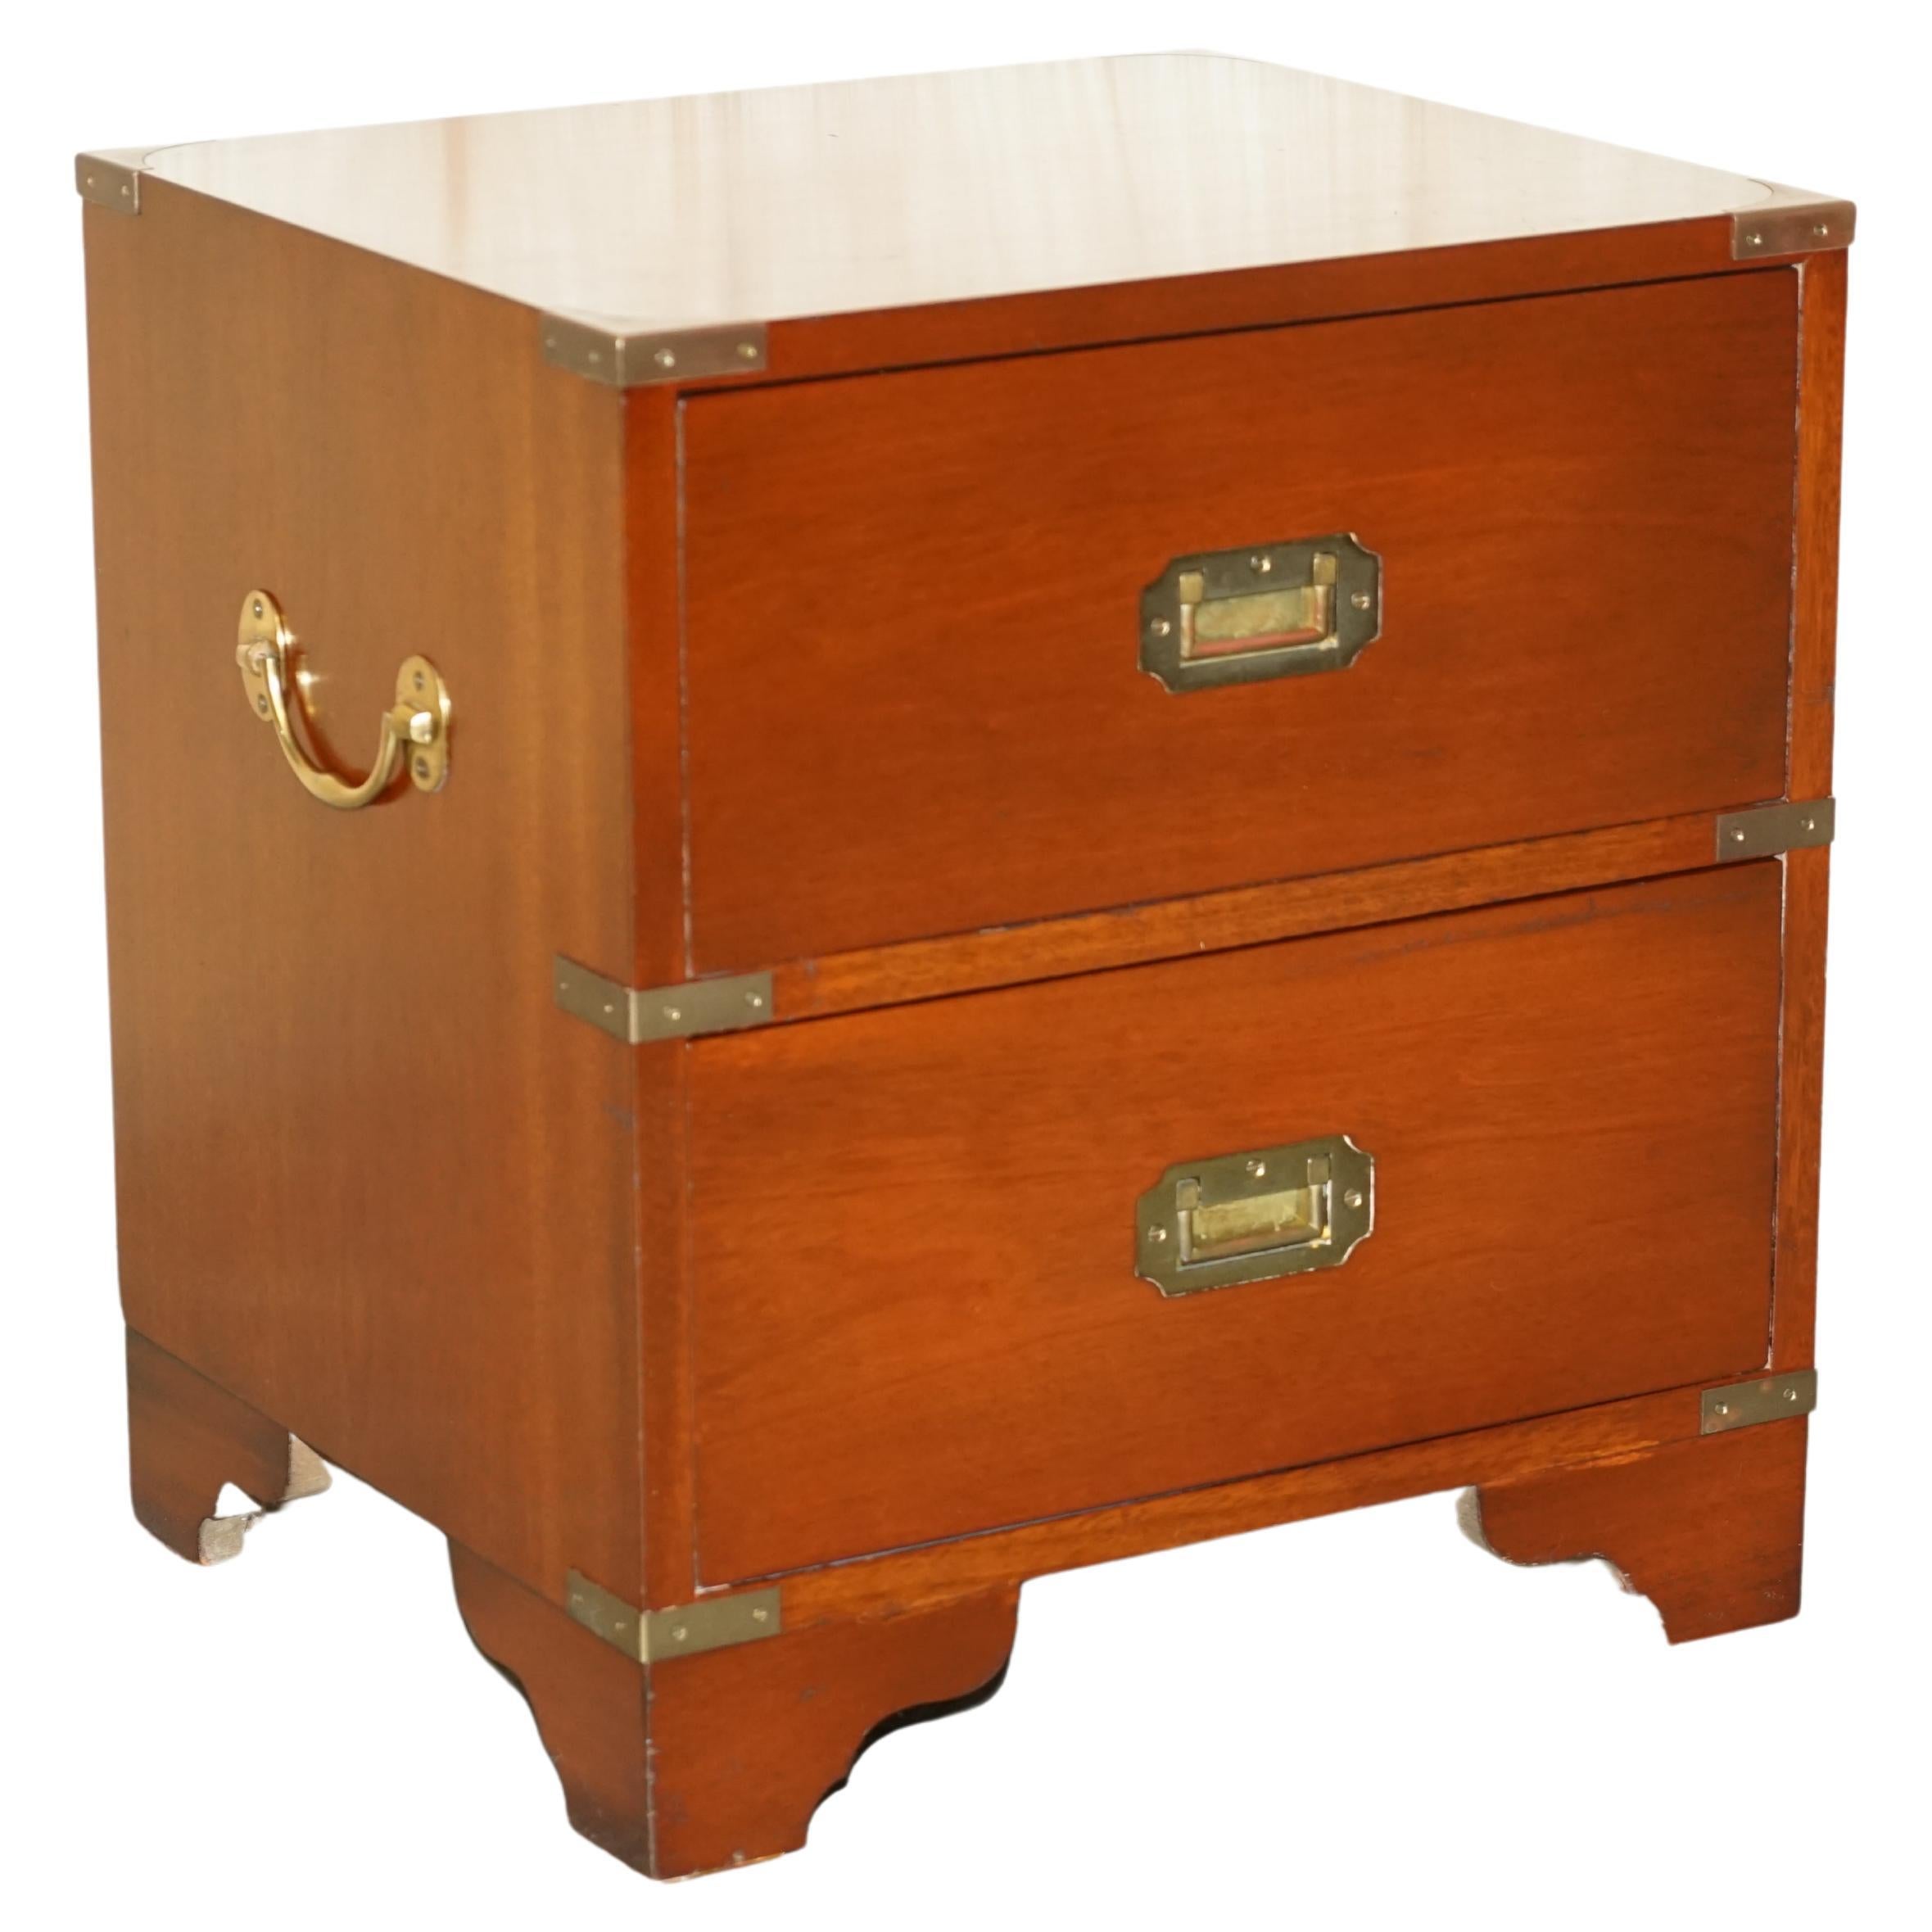 HARRODS KENNEDY MILITARY CAMPAIGN SIDE END LAMP WiNE TABLE DRAWERS CIRCA 1960'S